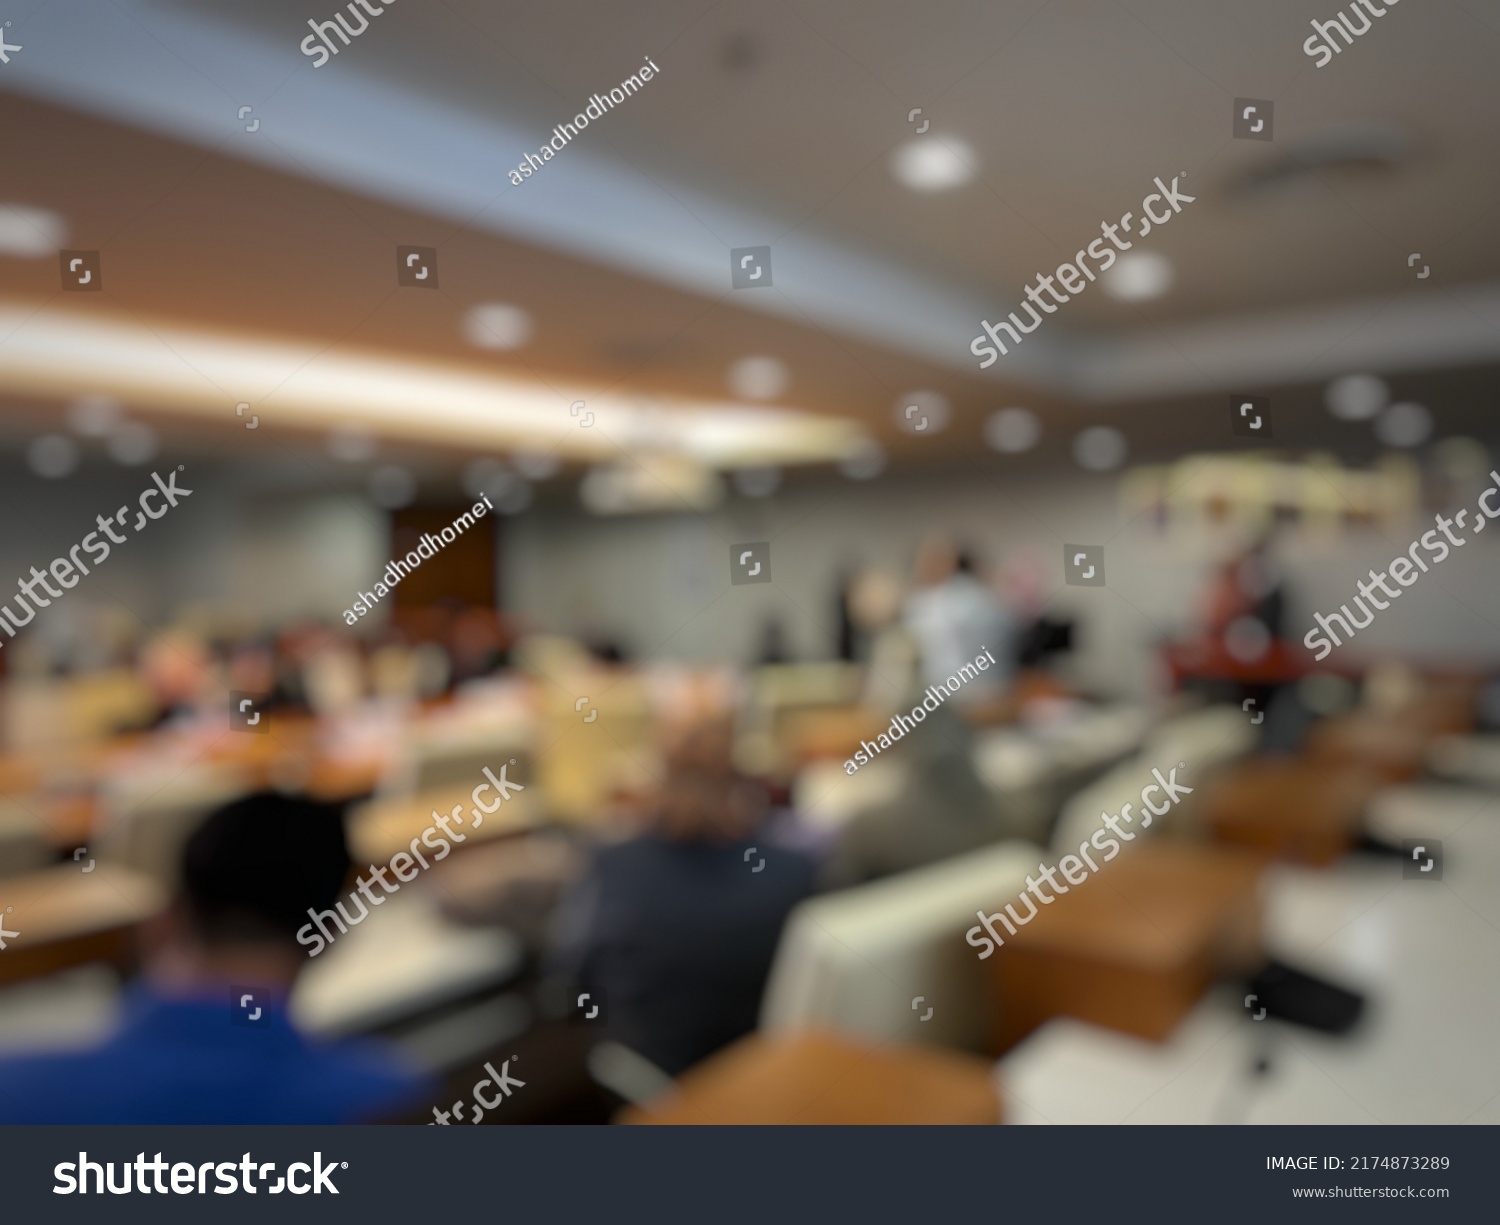 Blurry background of meeting held in a hall #2174873289